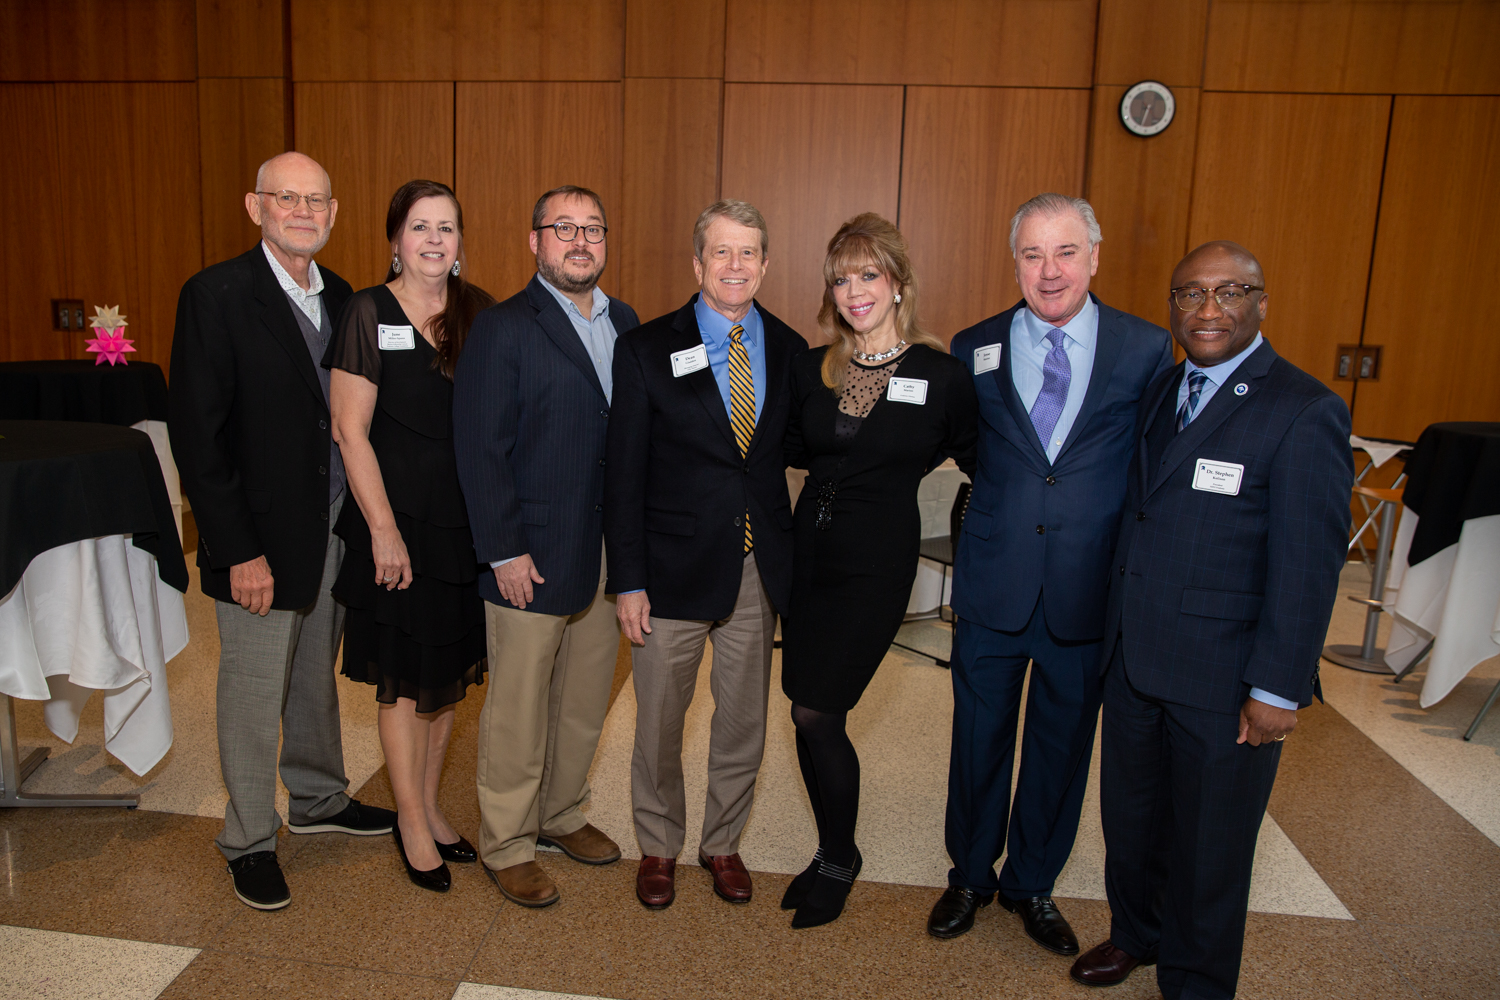 From L-R: Marty W. Merkley, President, Kay Hardesty Logan Foundation, Alexandria, VA; June Miller-Spann, Liaison for the Fredonia Foundation;  William Belcher , President, Ucross Foundation, Clearmont, WY; Dean Gladden, Managing Director, Alley Theatre, Houston, TX; Cathy and Jesse Marion; SUNY Fredonia President Dr. Stephen H. Kolison.